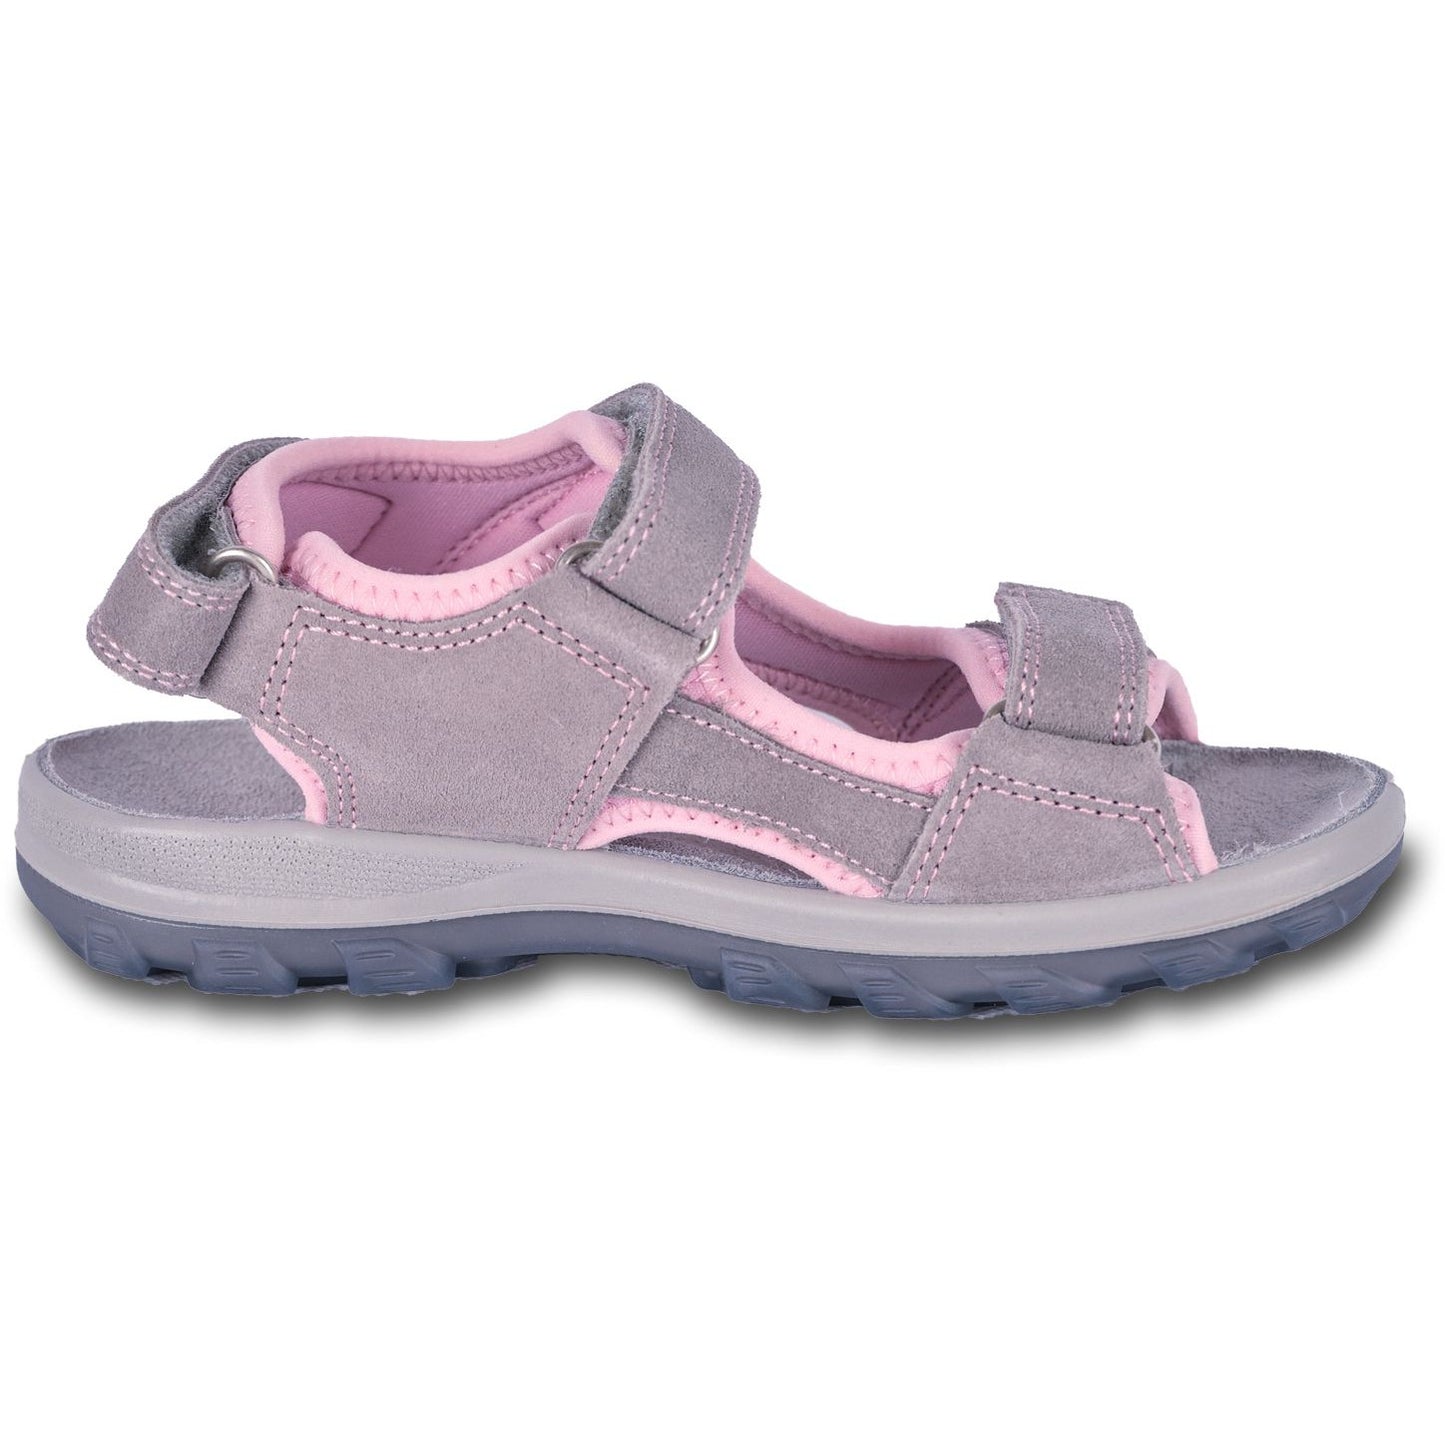 Anatomically shaped sandals for older girls have a naturally shaped arch support embedded in the sole.